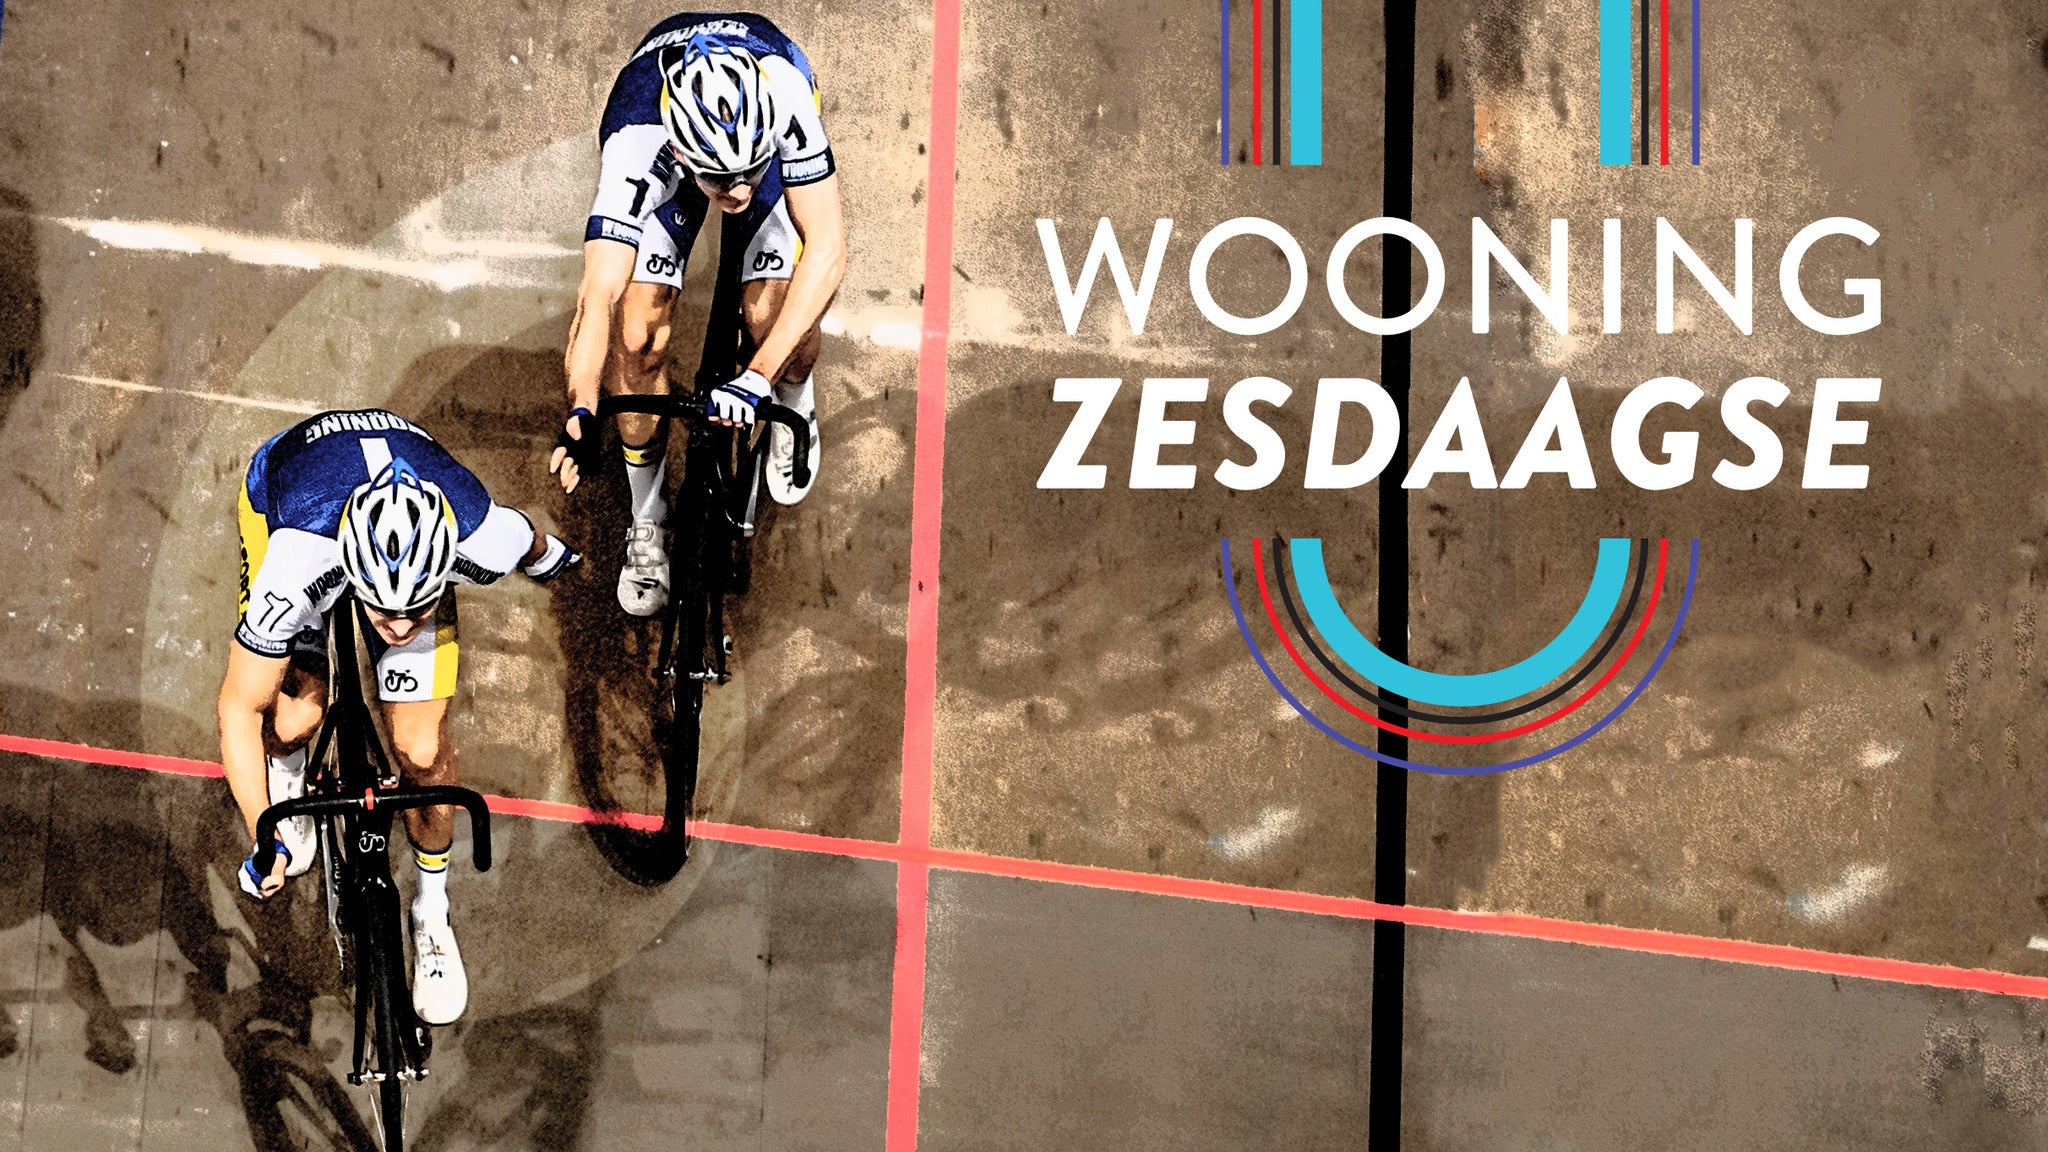 Wooning Zesdaagse - Day ticket Saturday 10 December